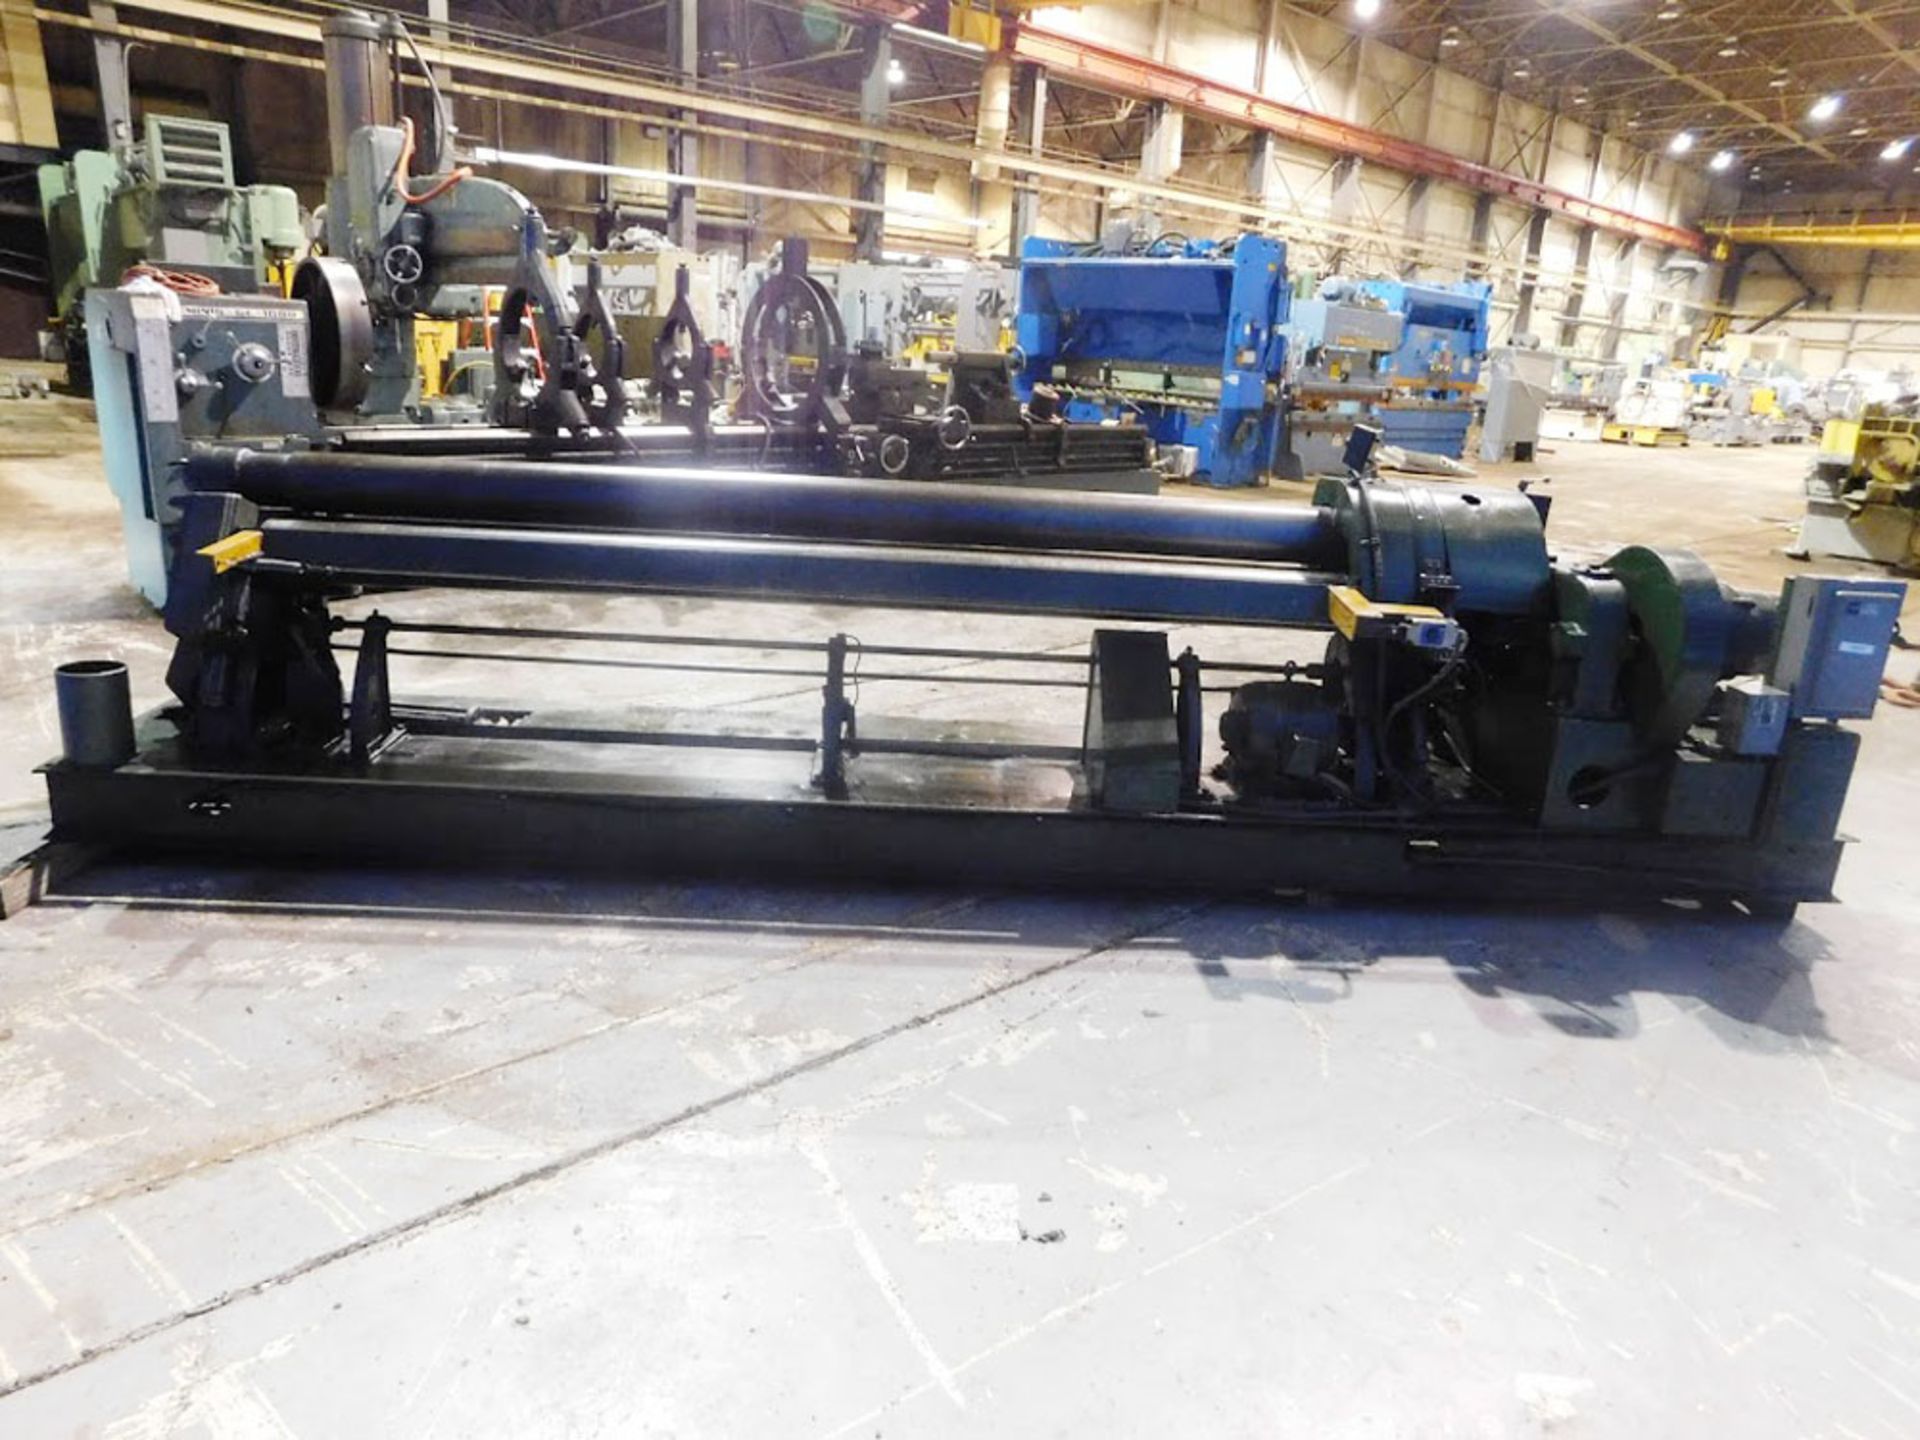 Webb - Initial Pinch Power Roll | 10 Ga. x 10', Located In Painesville, OH - 7331P - Image 6 of 14